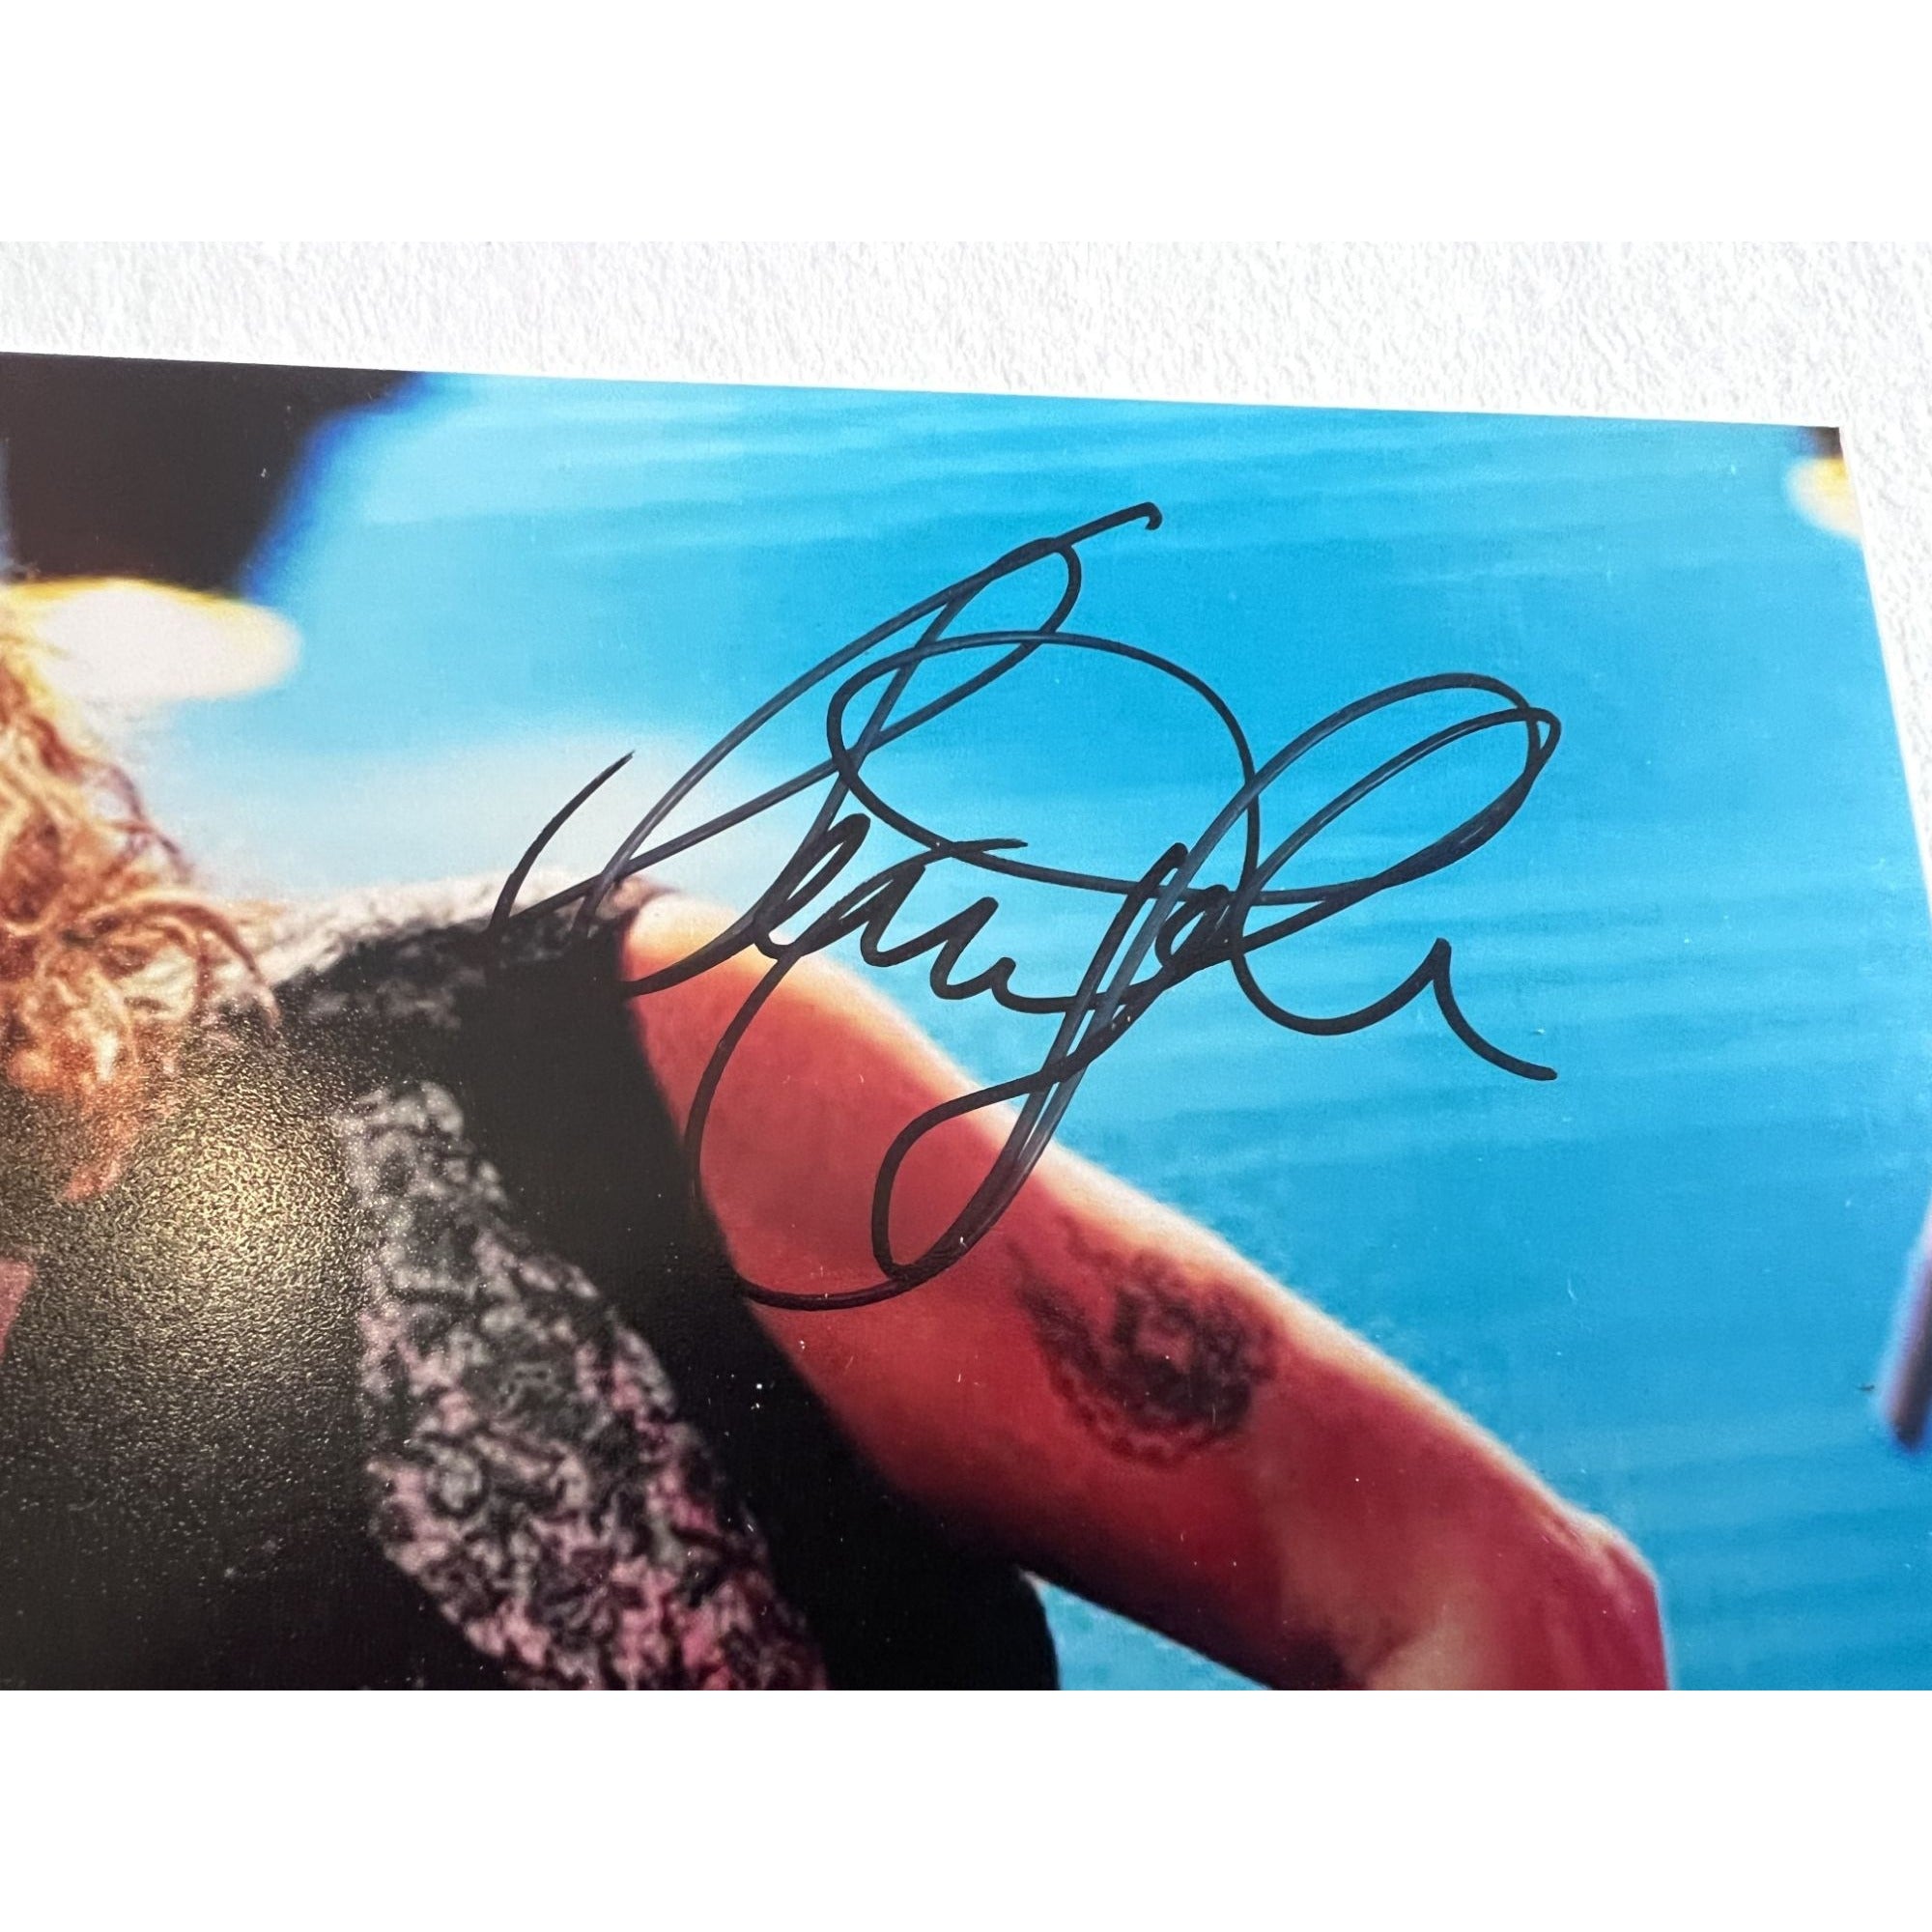 Steven Tyler of Aerosmith 8 by 10 signed photo with proof